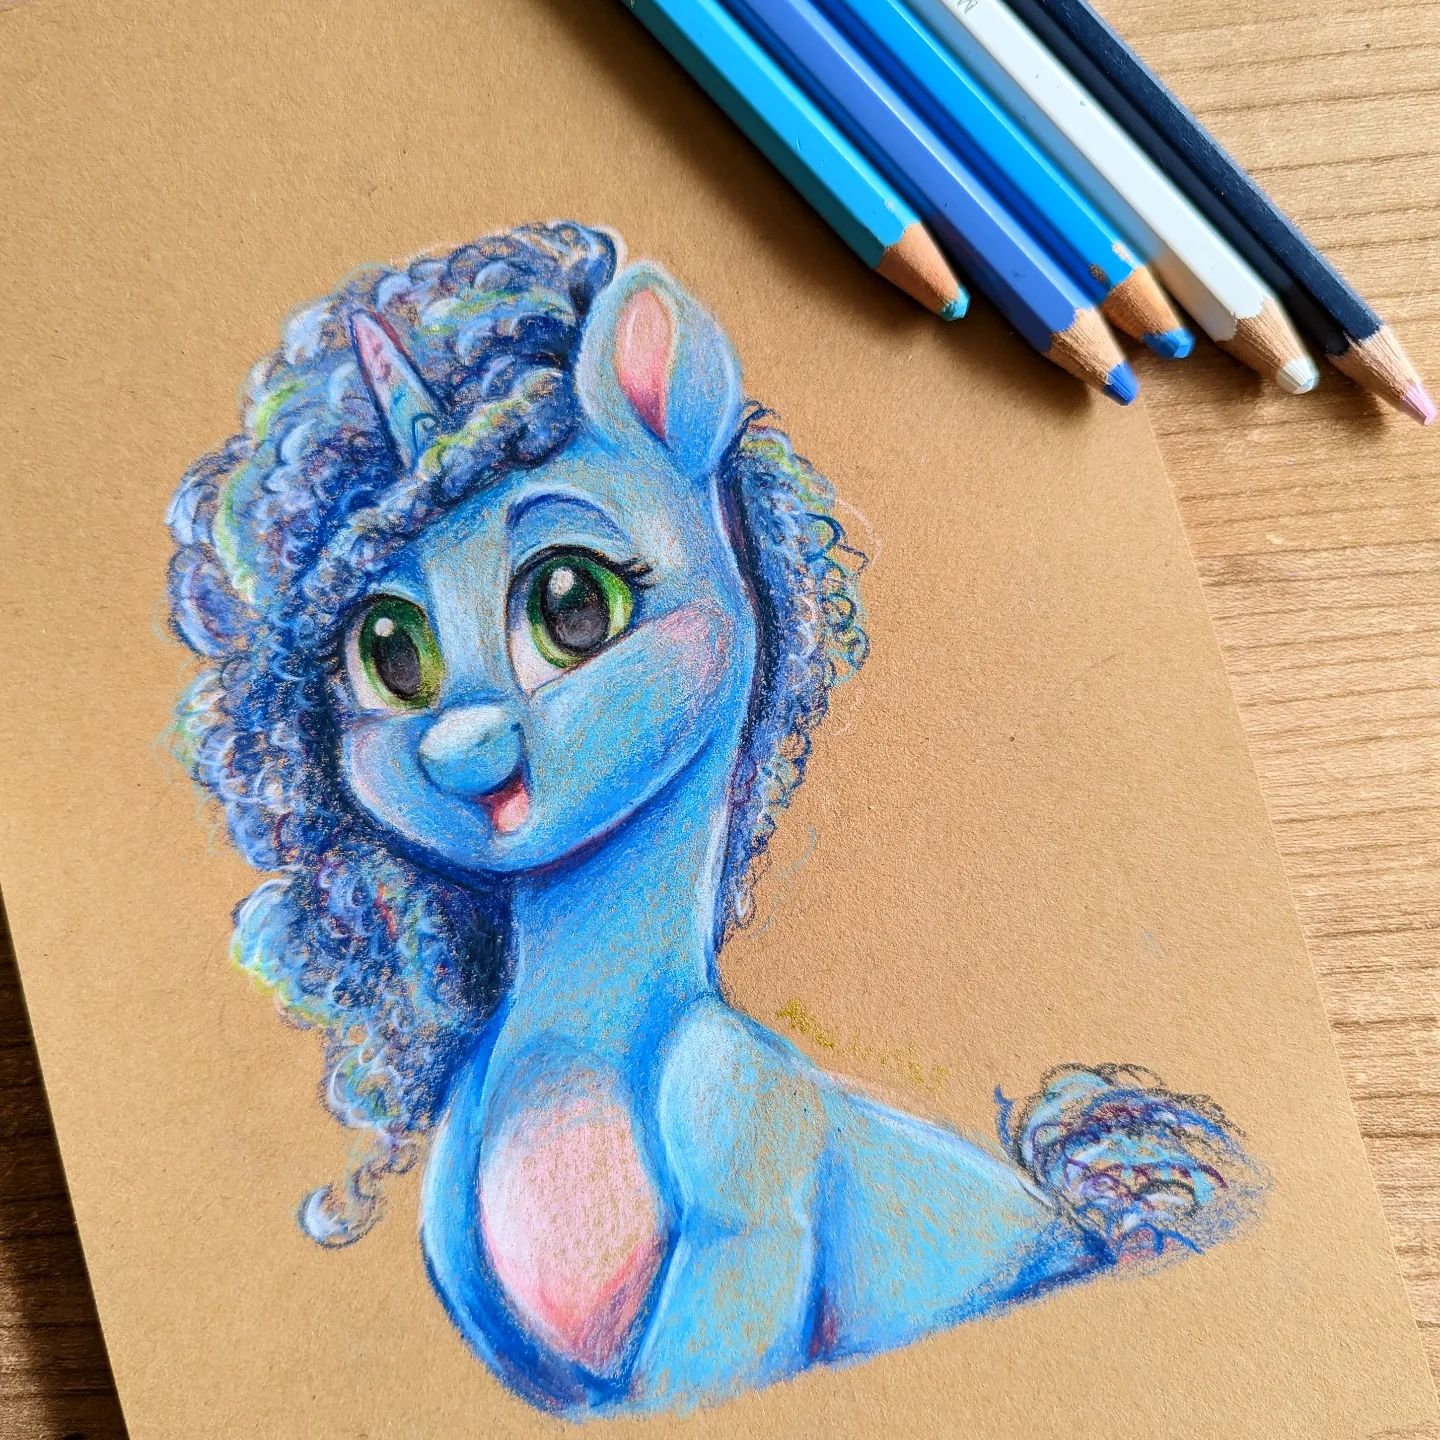 Misty! Colored pencils on recycled paper. Also my first time drawing her.
.
.
.

#mlp #mylittlepony #brony